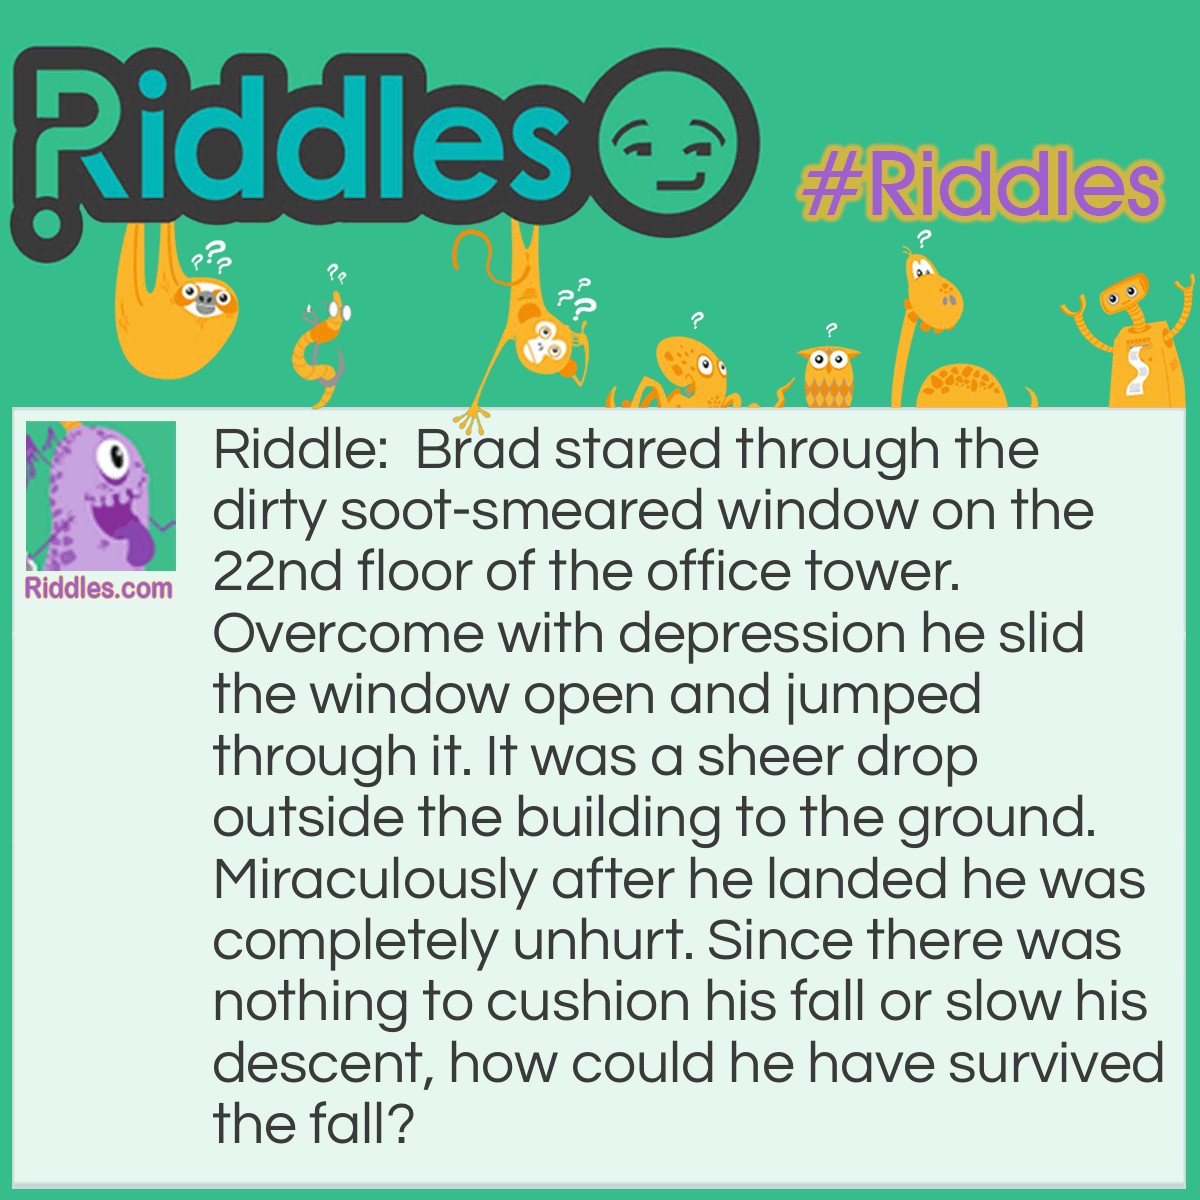 Riddle: Brad stared through the dirty soot-smeared window on the 22nd floor of the office tower. Overcome with depression he slid the window open and jumped through it. It was a sheer drop outside the building to the ground. Miraculously after he landed he was completely unhurt. Since there was nothing to cushion his fall or slow his descent, how could he have survived the fall? Answer: Brad was so sick and tired of window washing, he opened the window and jumped inside.